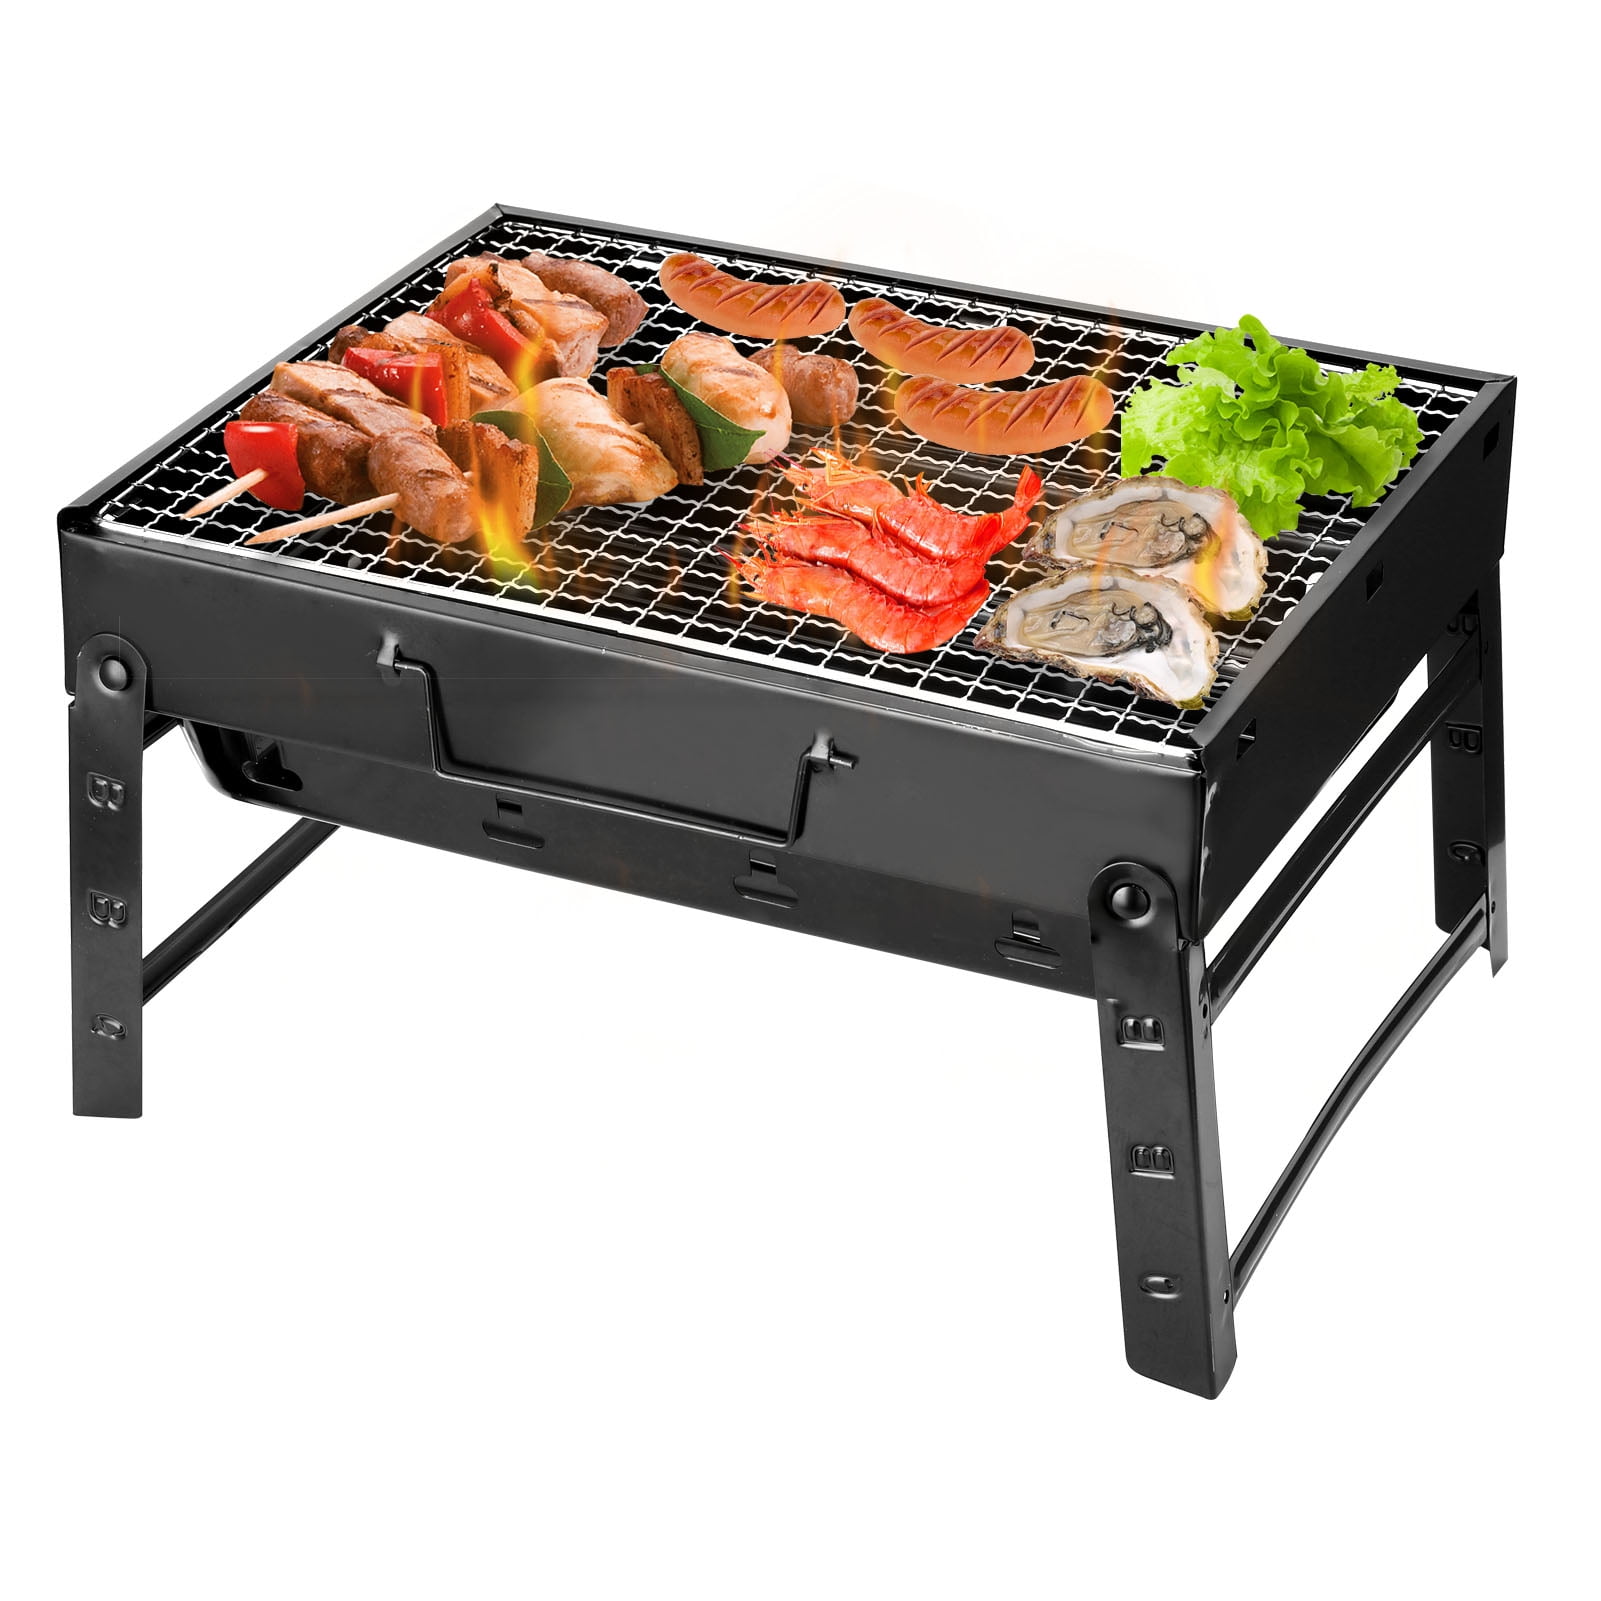 BBQ GRILL PORTABLE FOLDING CHARCOAL CAMPING GARDEN OUTDOOR BARBECUE COOKING FUN 